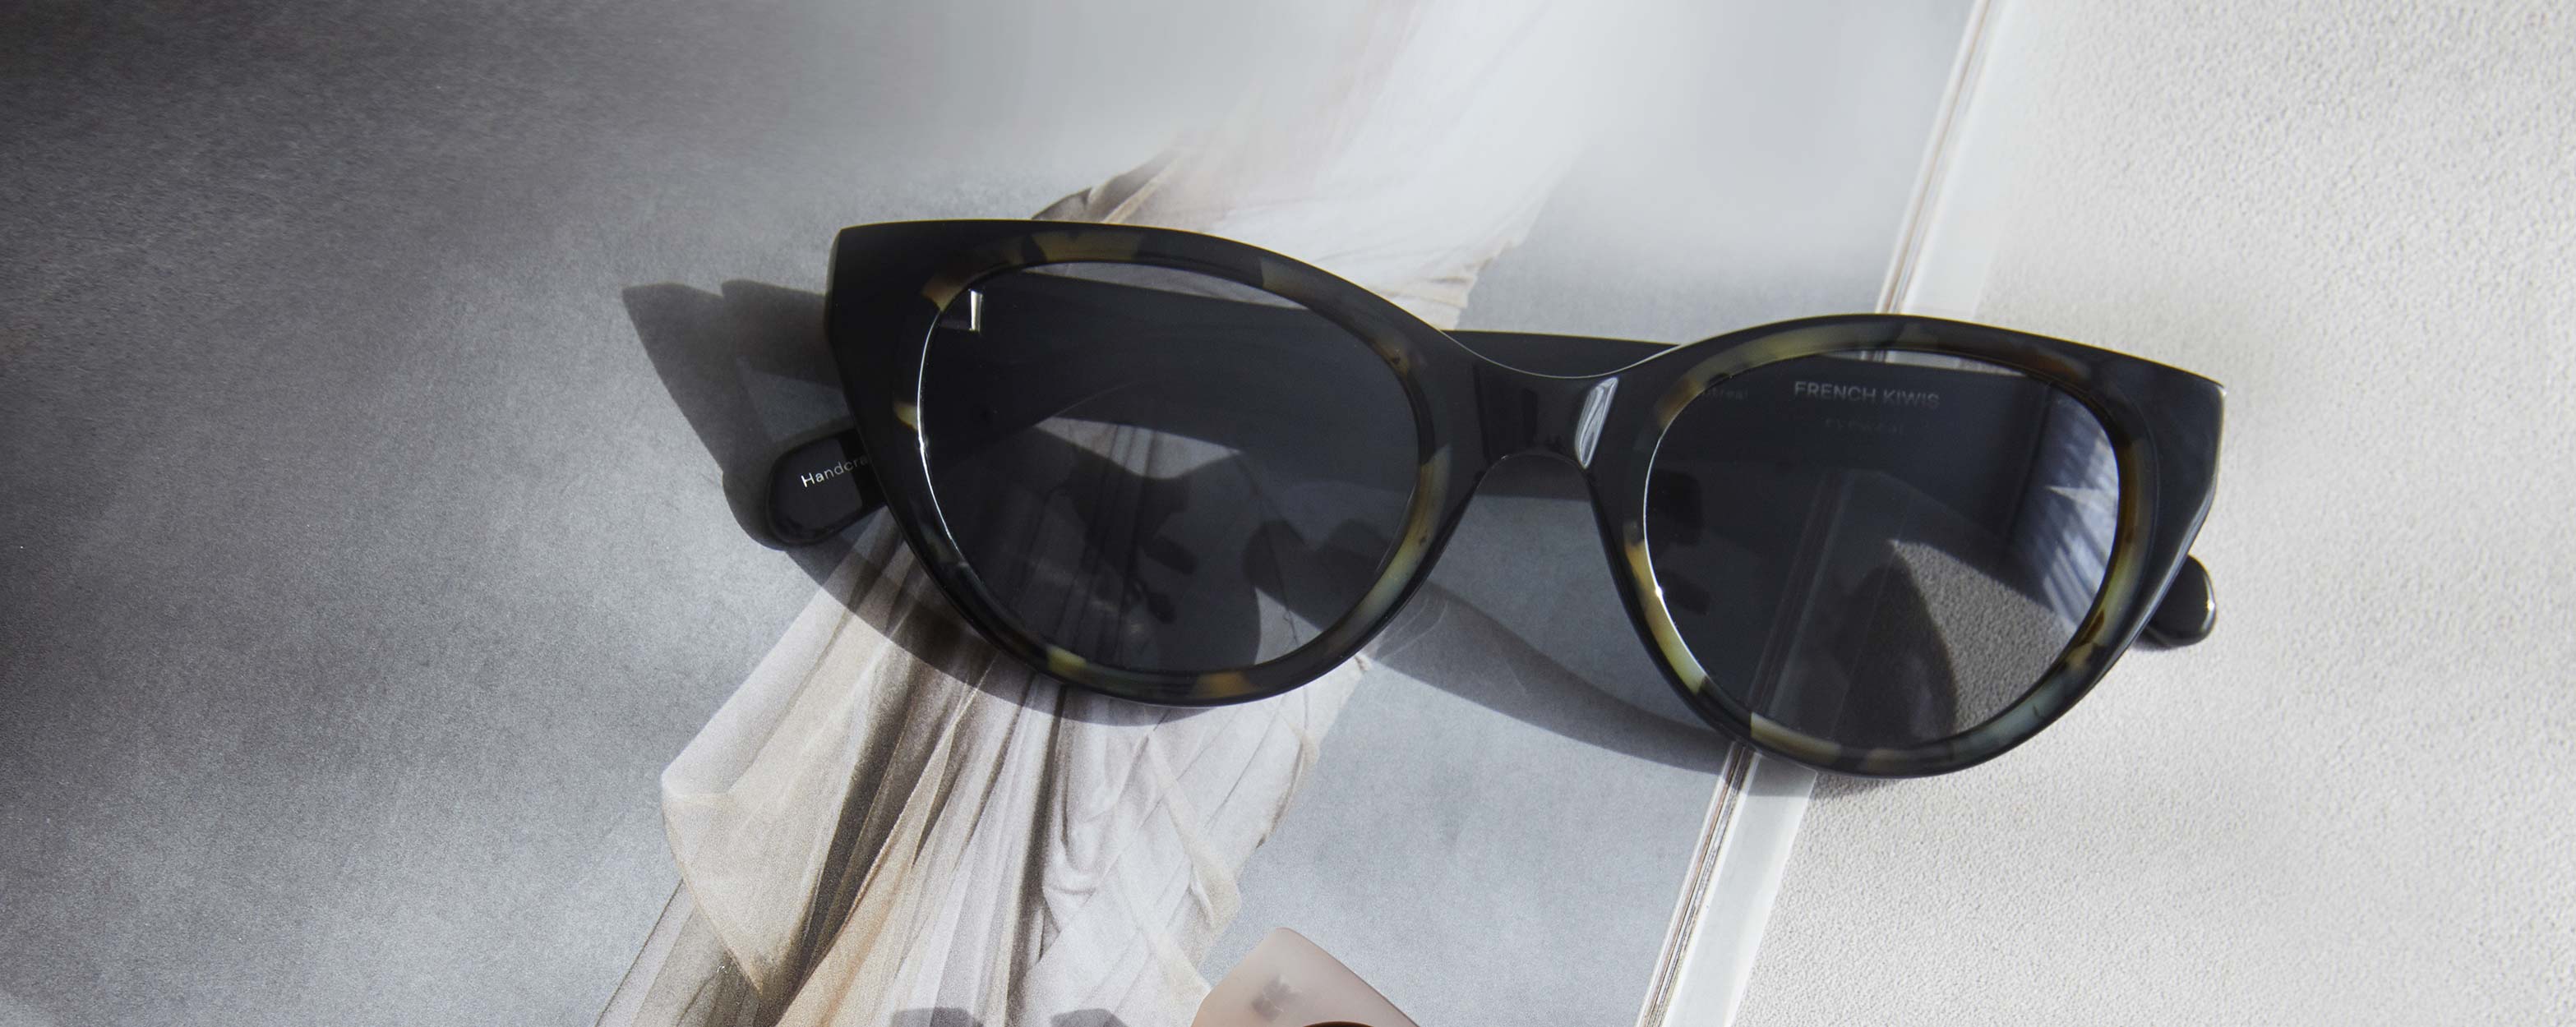 Photo Details of Colette Sun Black Marble Sun Glasses in a room